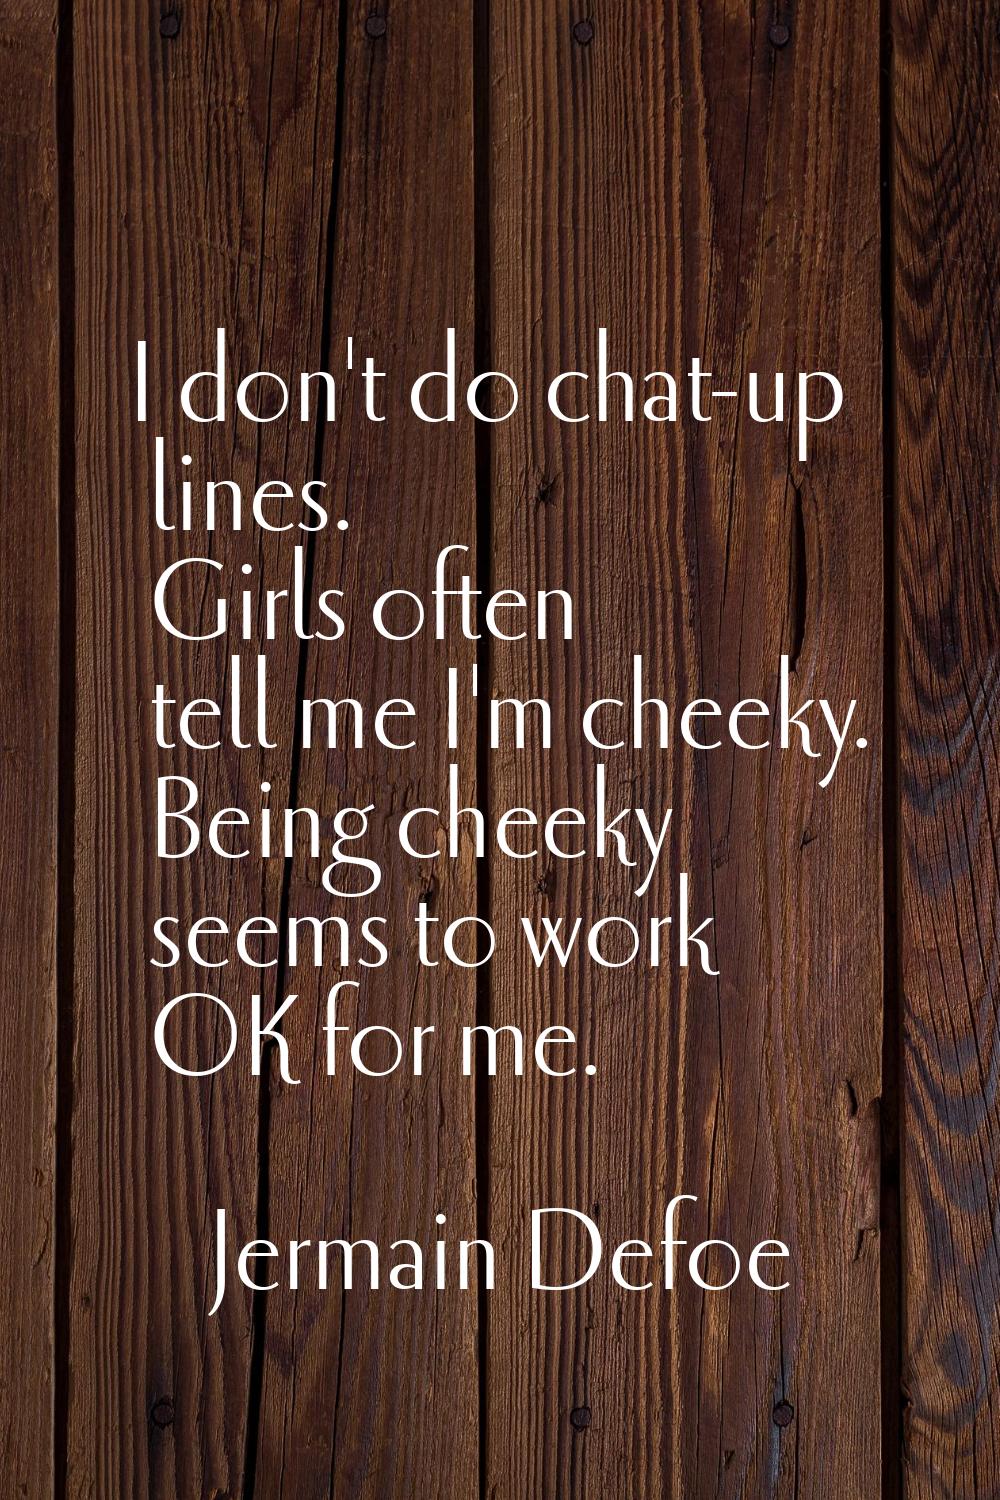 I don't do chat-up lines. Girls often tell me I'm cheeky. Being cheeky seems to work OK for me.